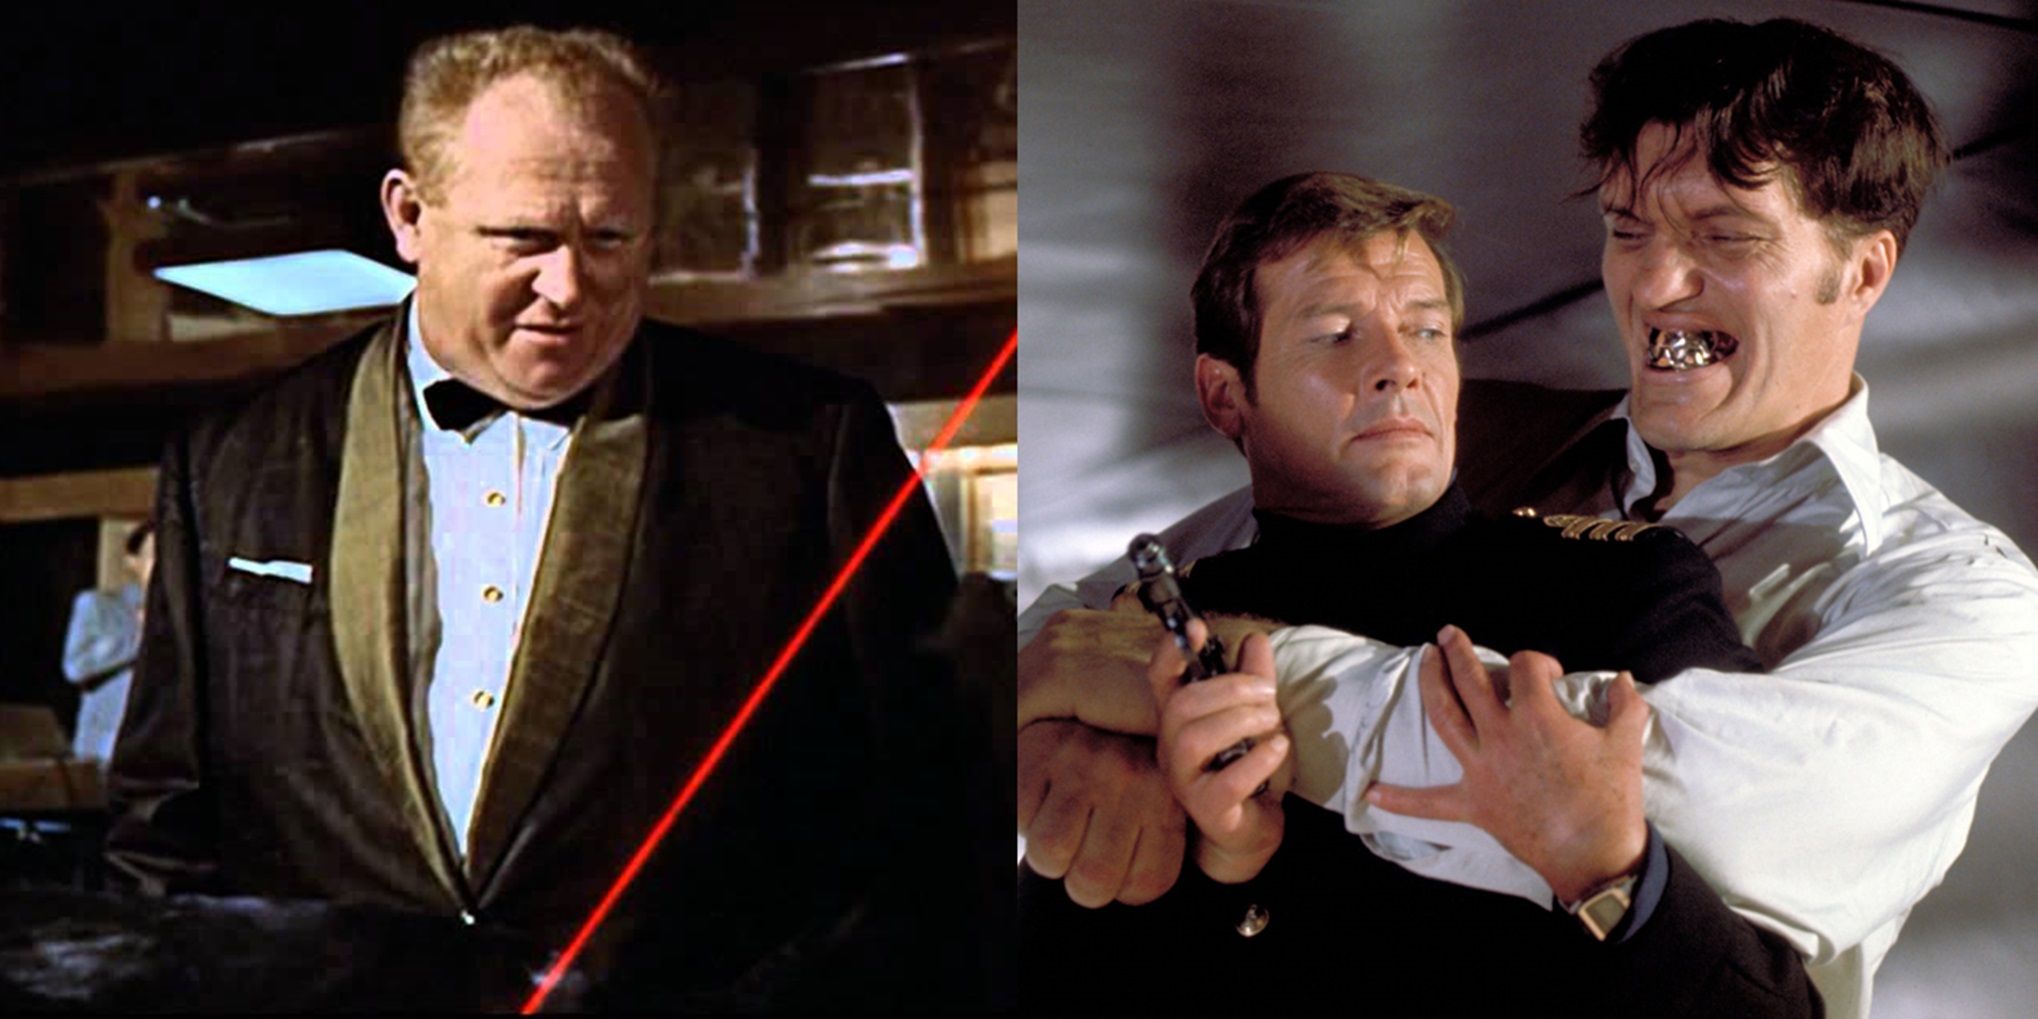 Split image of Auric Goldfinger with a laser beam and Jaws attacking James Bond